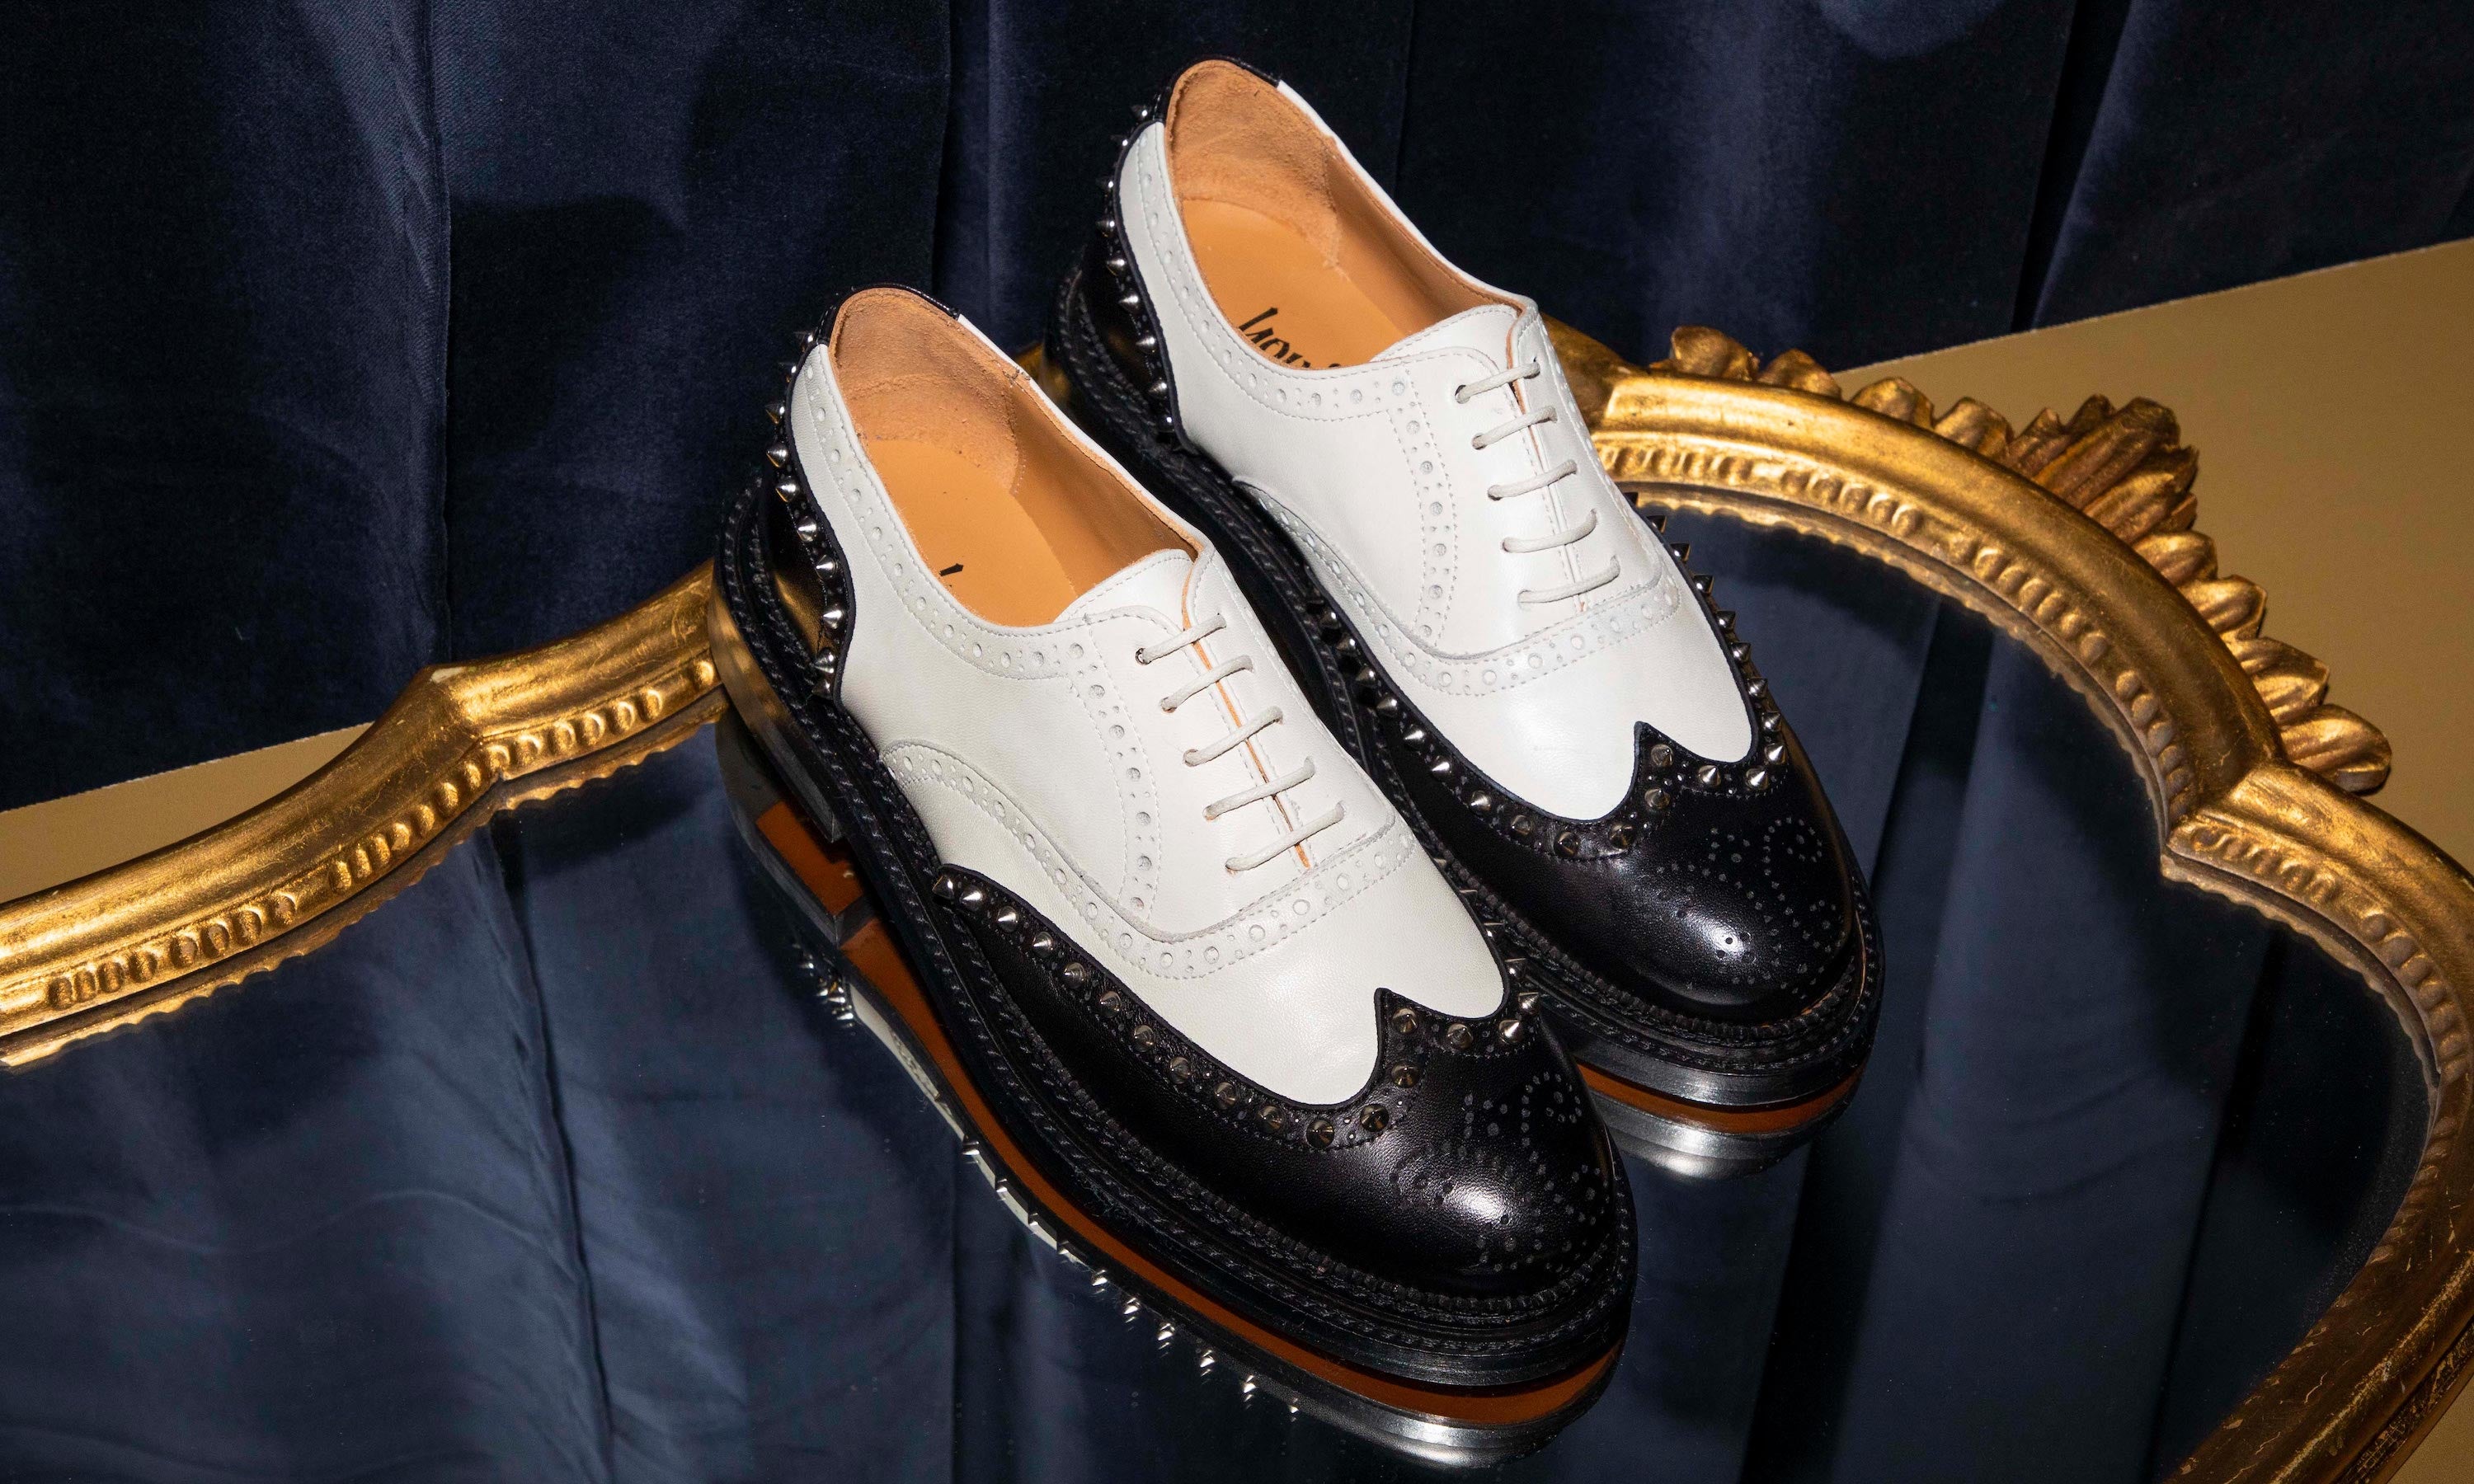 jameela black and white oxford spectator sits in a decadent setting of dark blue velvet and gold